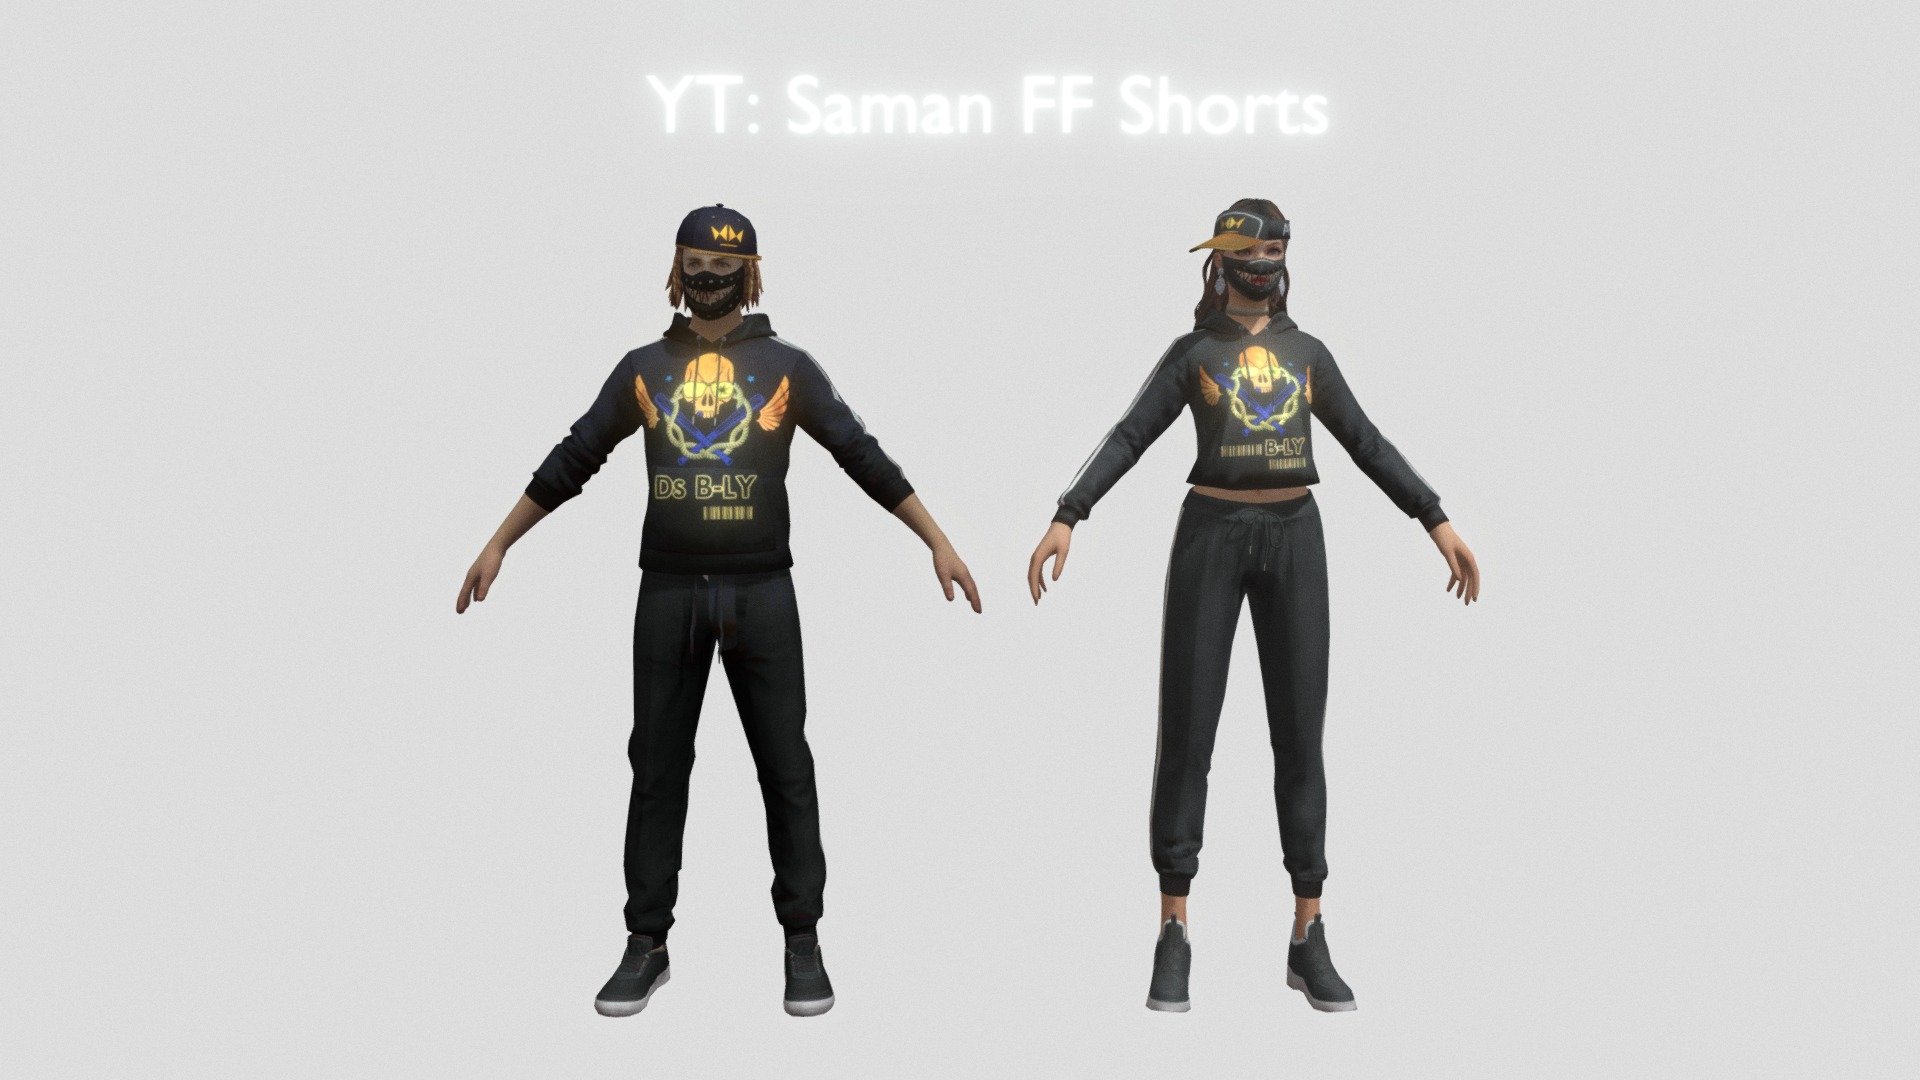 Track Suit 3D model by Saman FF Shorts A Pose/ T Pose Free Fire Both male and female Bundle 3d model in T pose shape easy to rig and animate without problems For Mobile and PC .fbx File Garena Free Fire Max New event Bundle All texture Maps are Given Attached use them to get the best quality out of it.

Contact My Instagram Acount For Paid Work: https://www.instagram.com/samanffind/

YouTube Channel: Saman FF

Track Suit Free Gold Royale 3d model - Track Suit Duo 3d Model Free Download - Download Free 3D model by @samanffind (@samanffind) 3d model